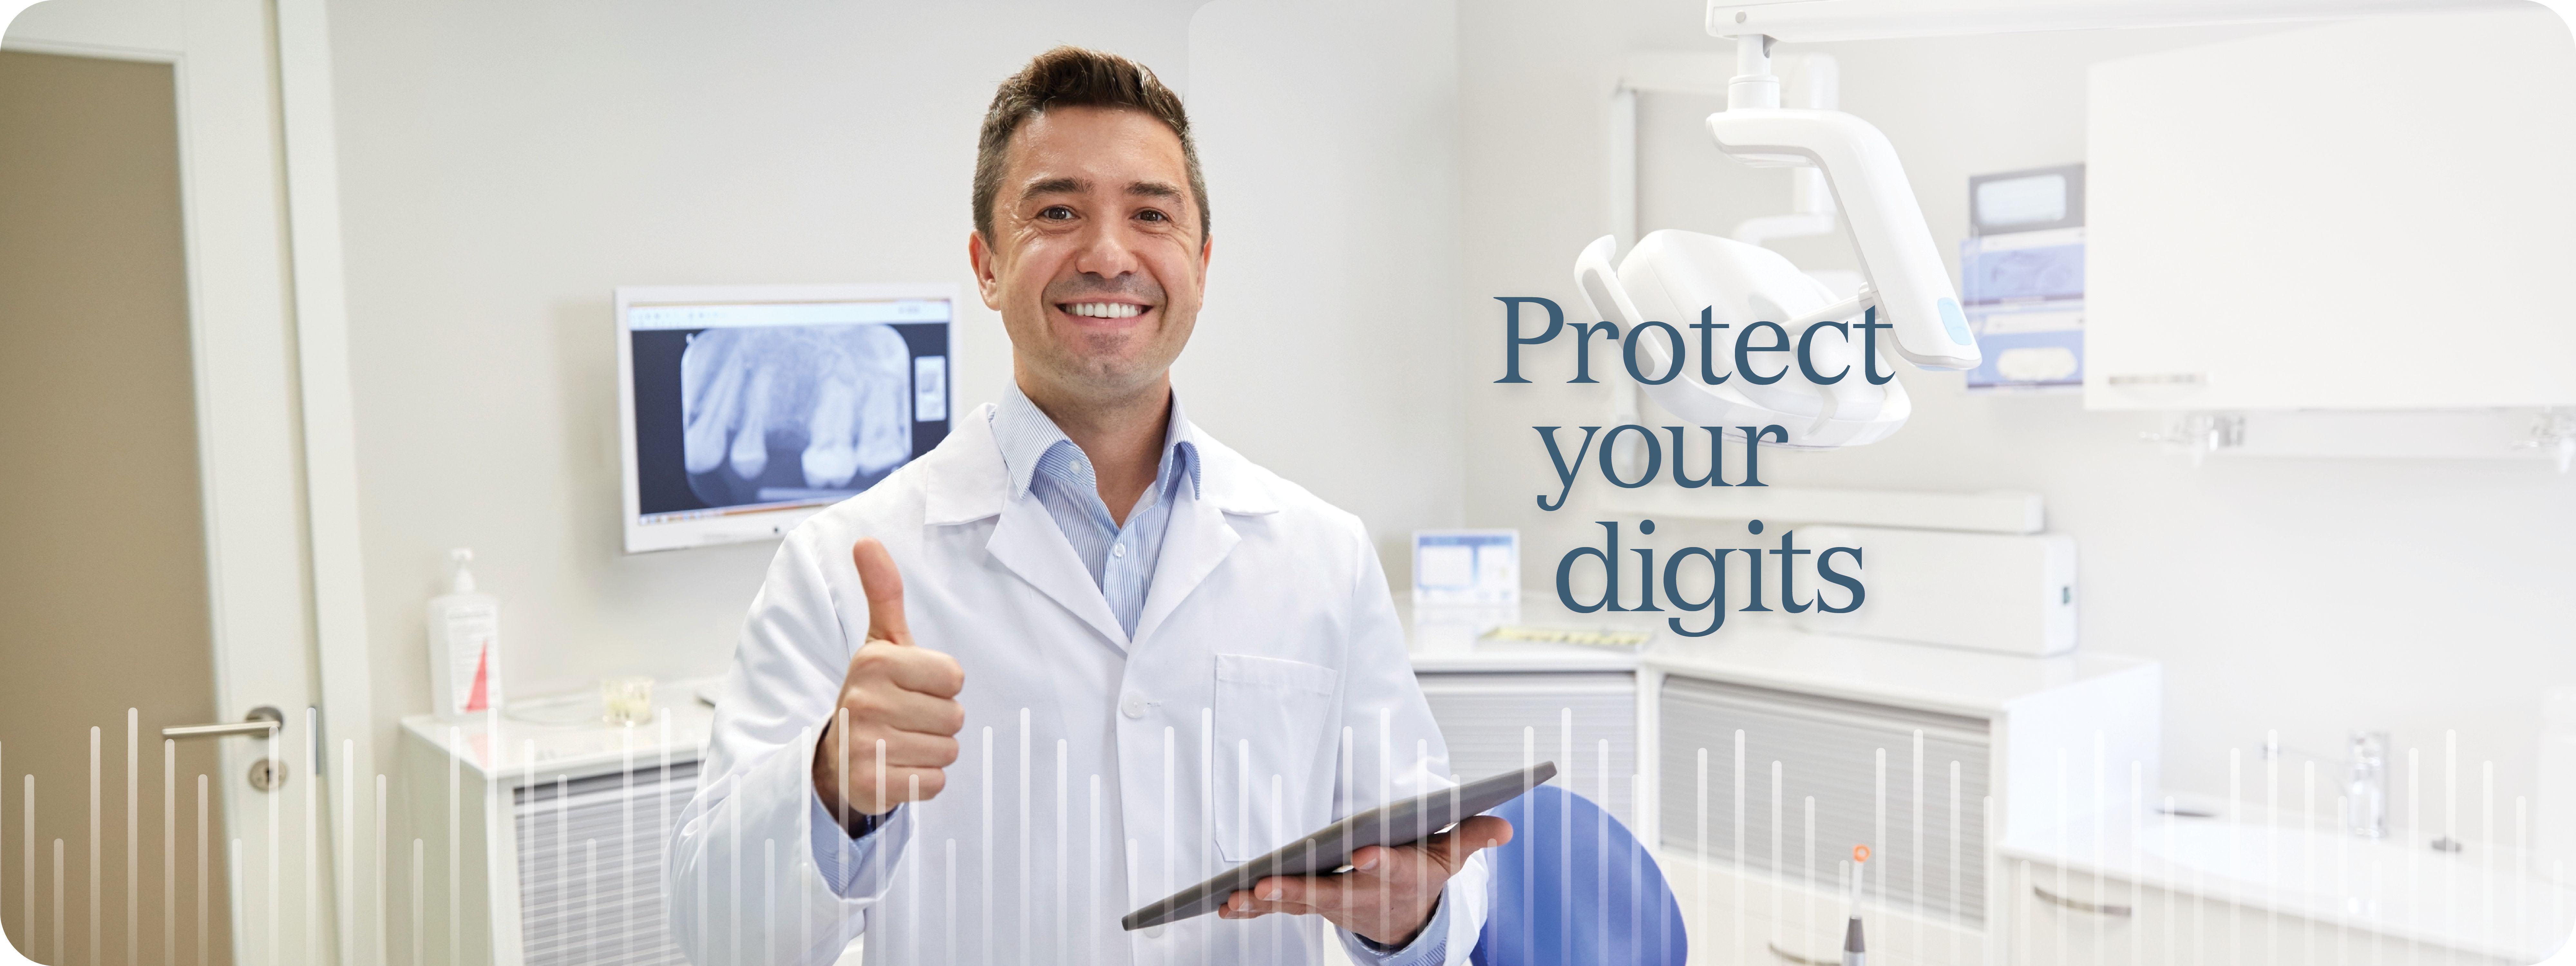 Protect your investment, your staff, your assets and your bottom line by improving X-ray safety, efficiency and effectiveness. Contact us today!